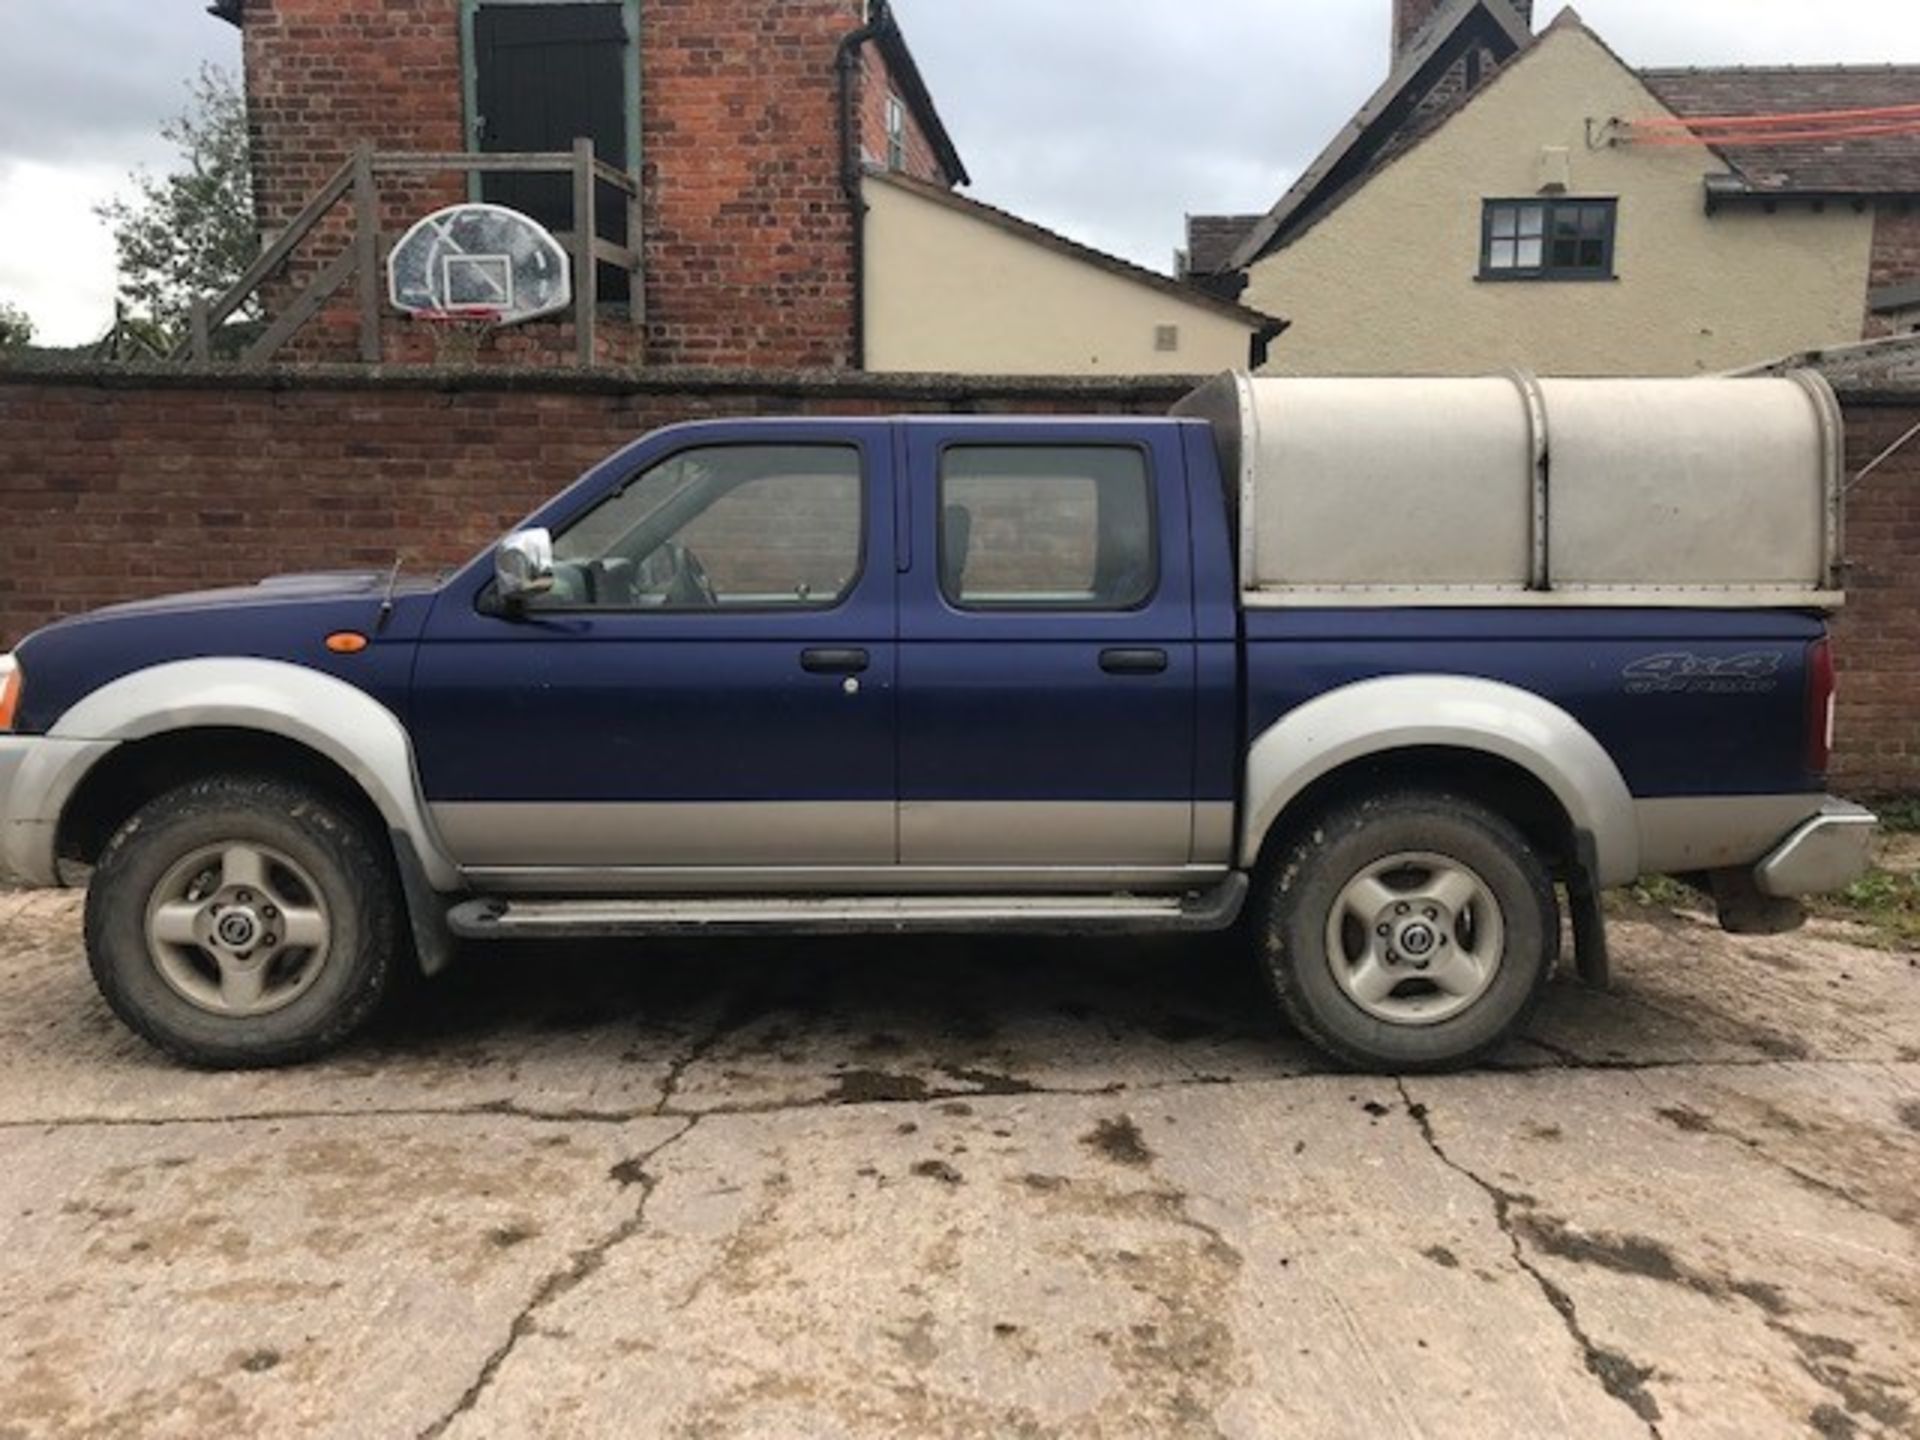 TWIN AXLE RIGID BODY NISSAN PICKUP - 2004 DIESEL - 4 DOOR WITH FULL BACK COVER- 6DISC CD PLAYER - Image 2 of 11